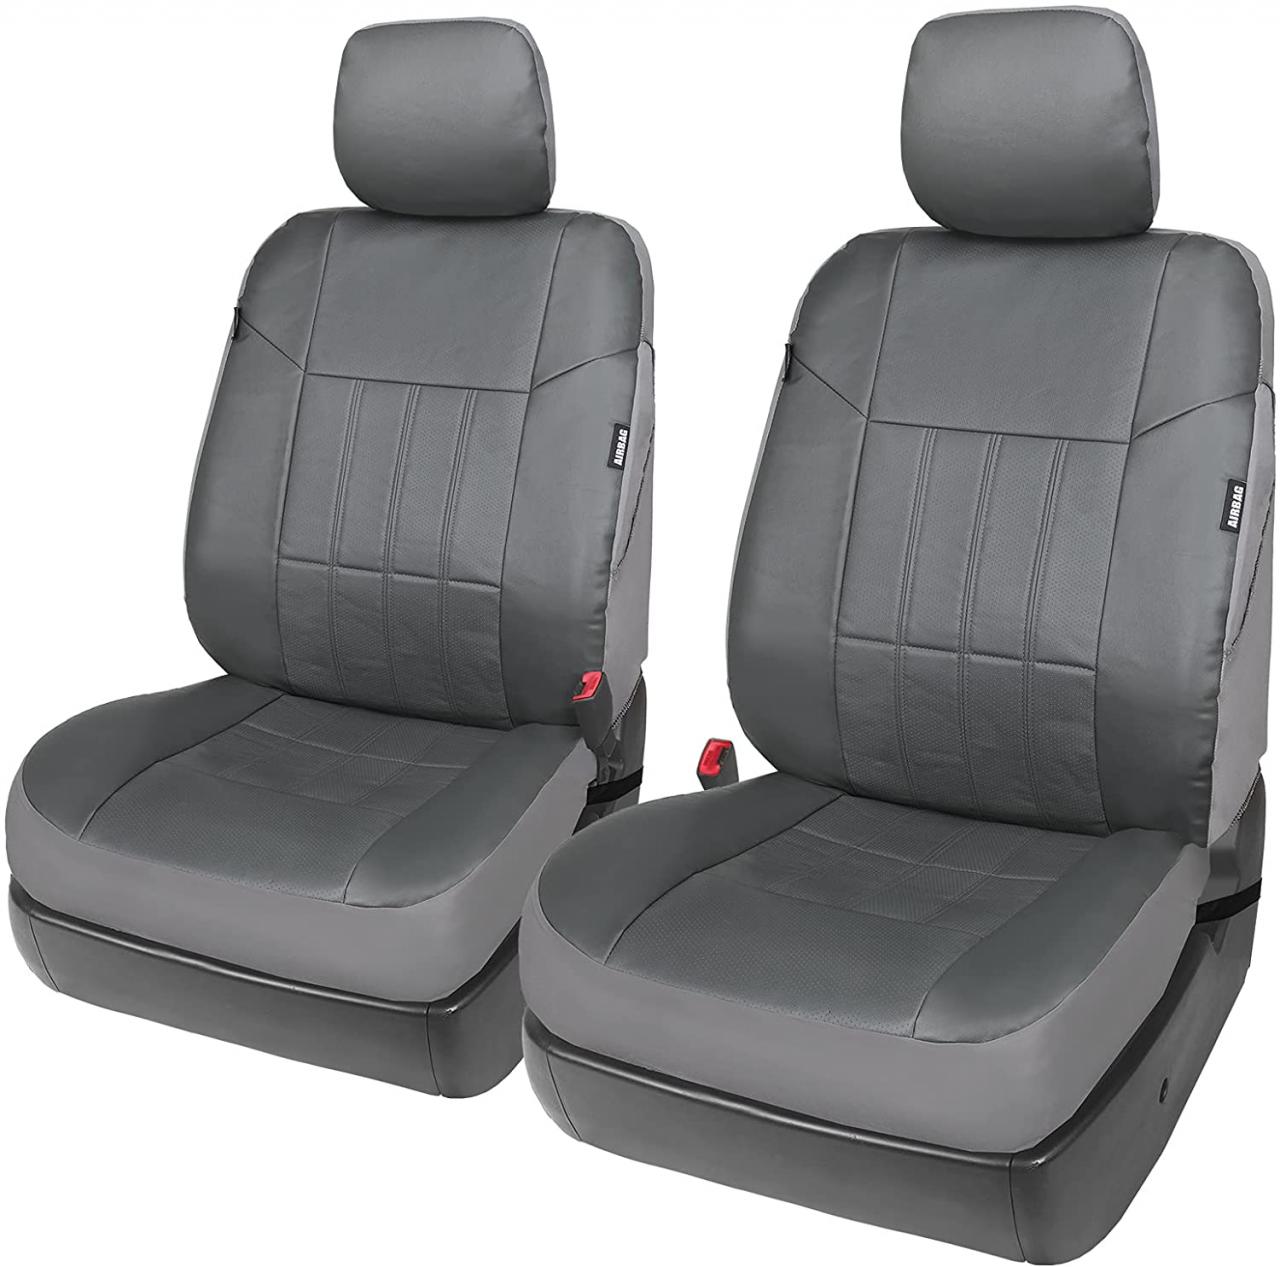 Buy Leader Accessories Platinum Vinyl Black/Grey One Faux Leather Front  Seat Cover Universal for Car Truck SUV Front Seats Online in Turkey.  B07C2MD739